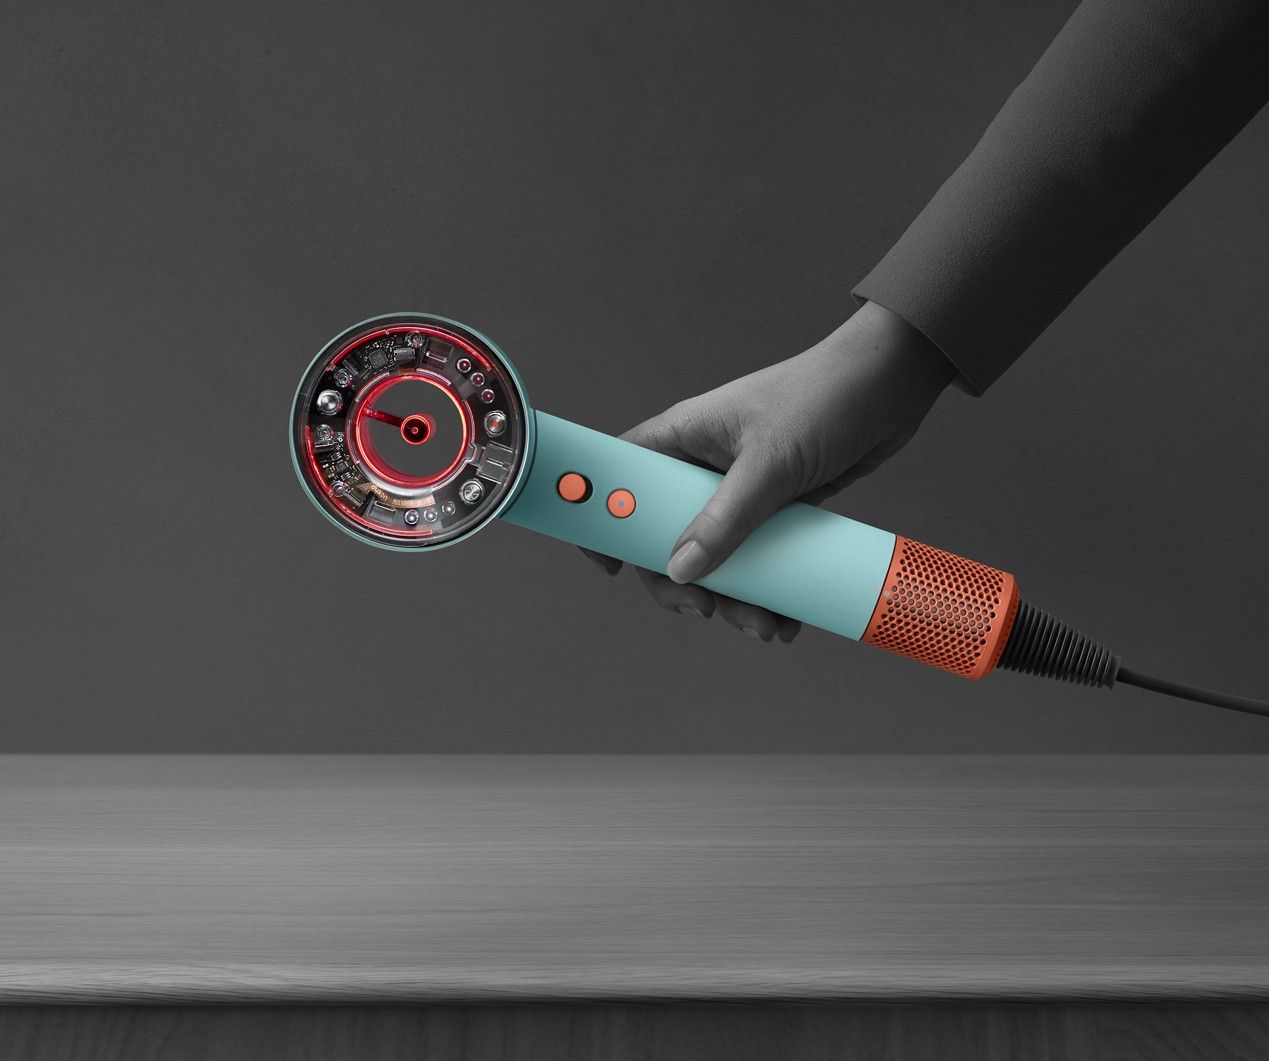 a hand picks up the dyson nural from a table while the led indicator light flashes red